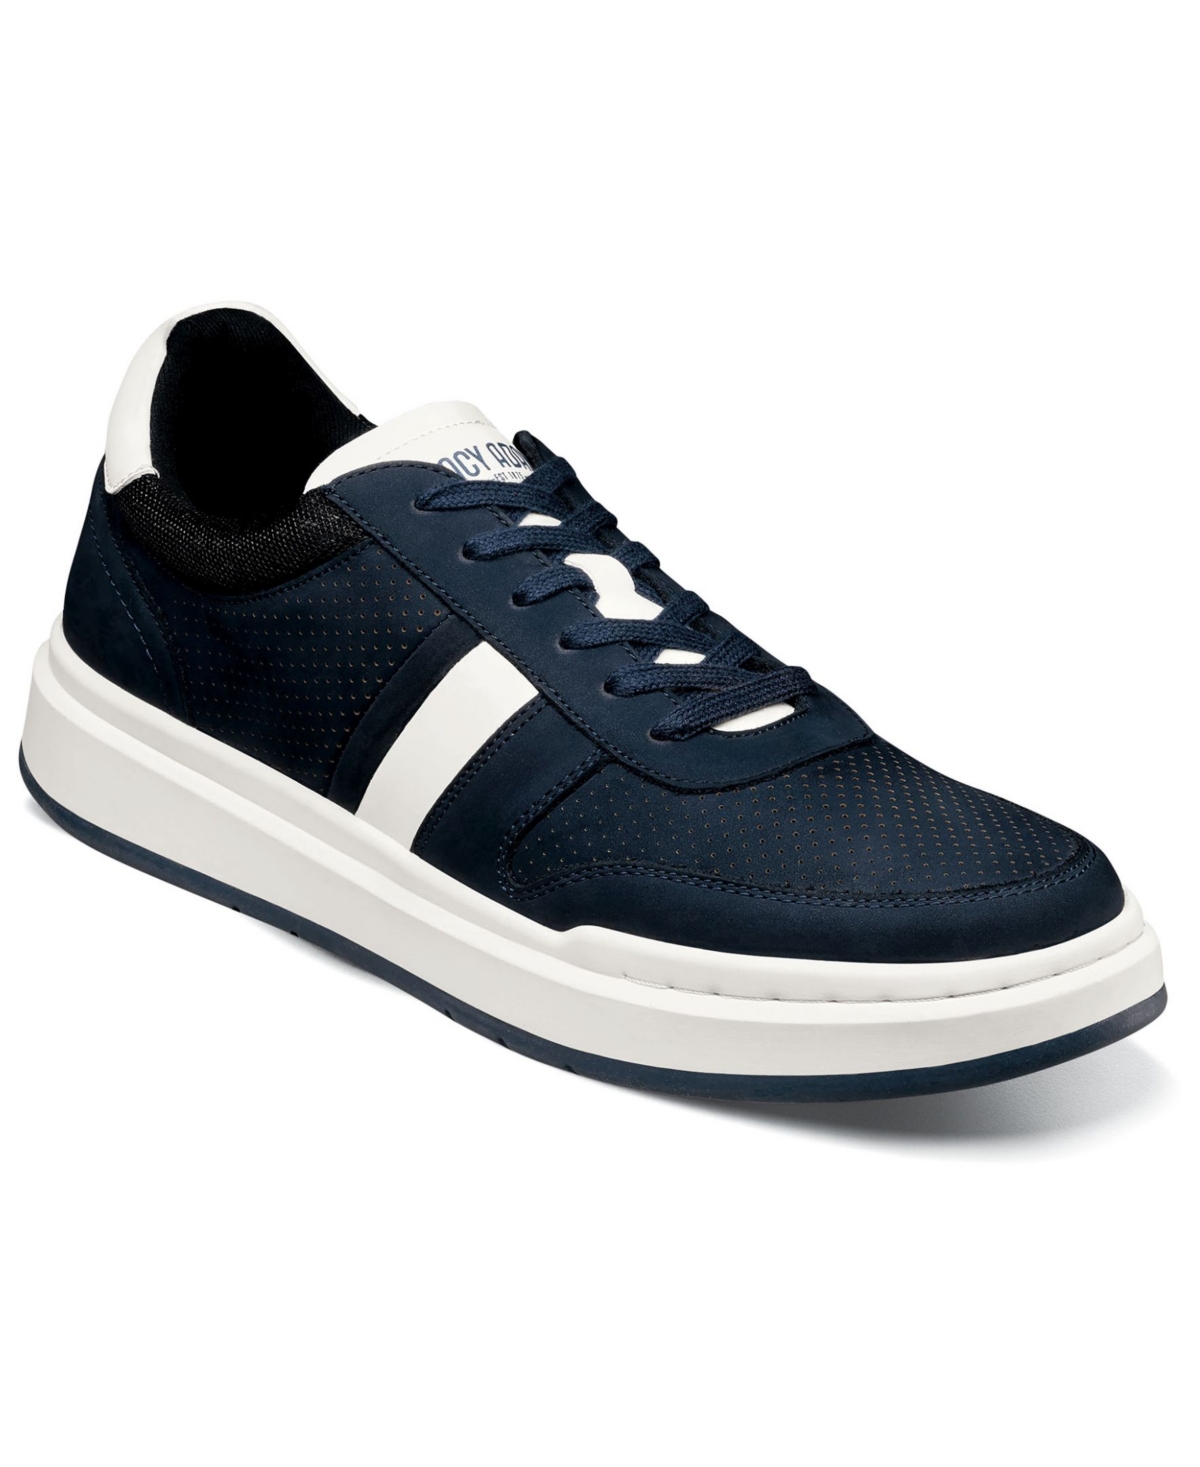 Men's Currier Moccasin Toe Lace Shoes - Navy